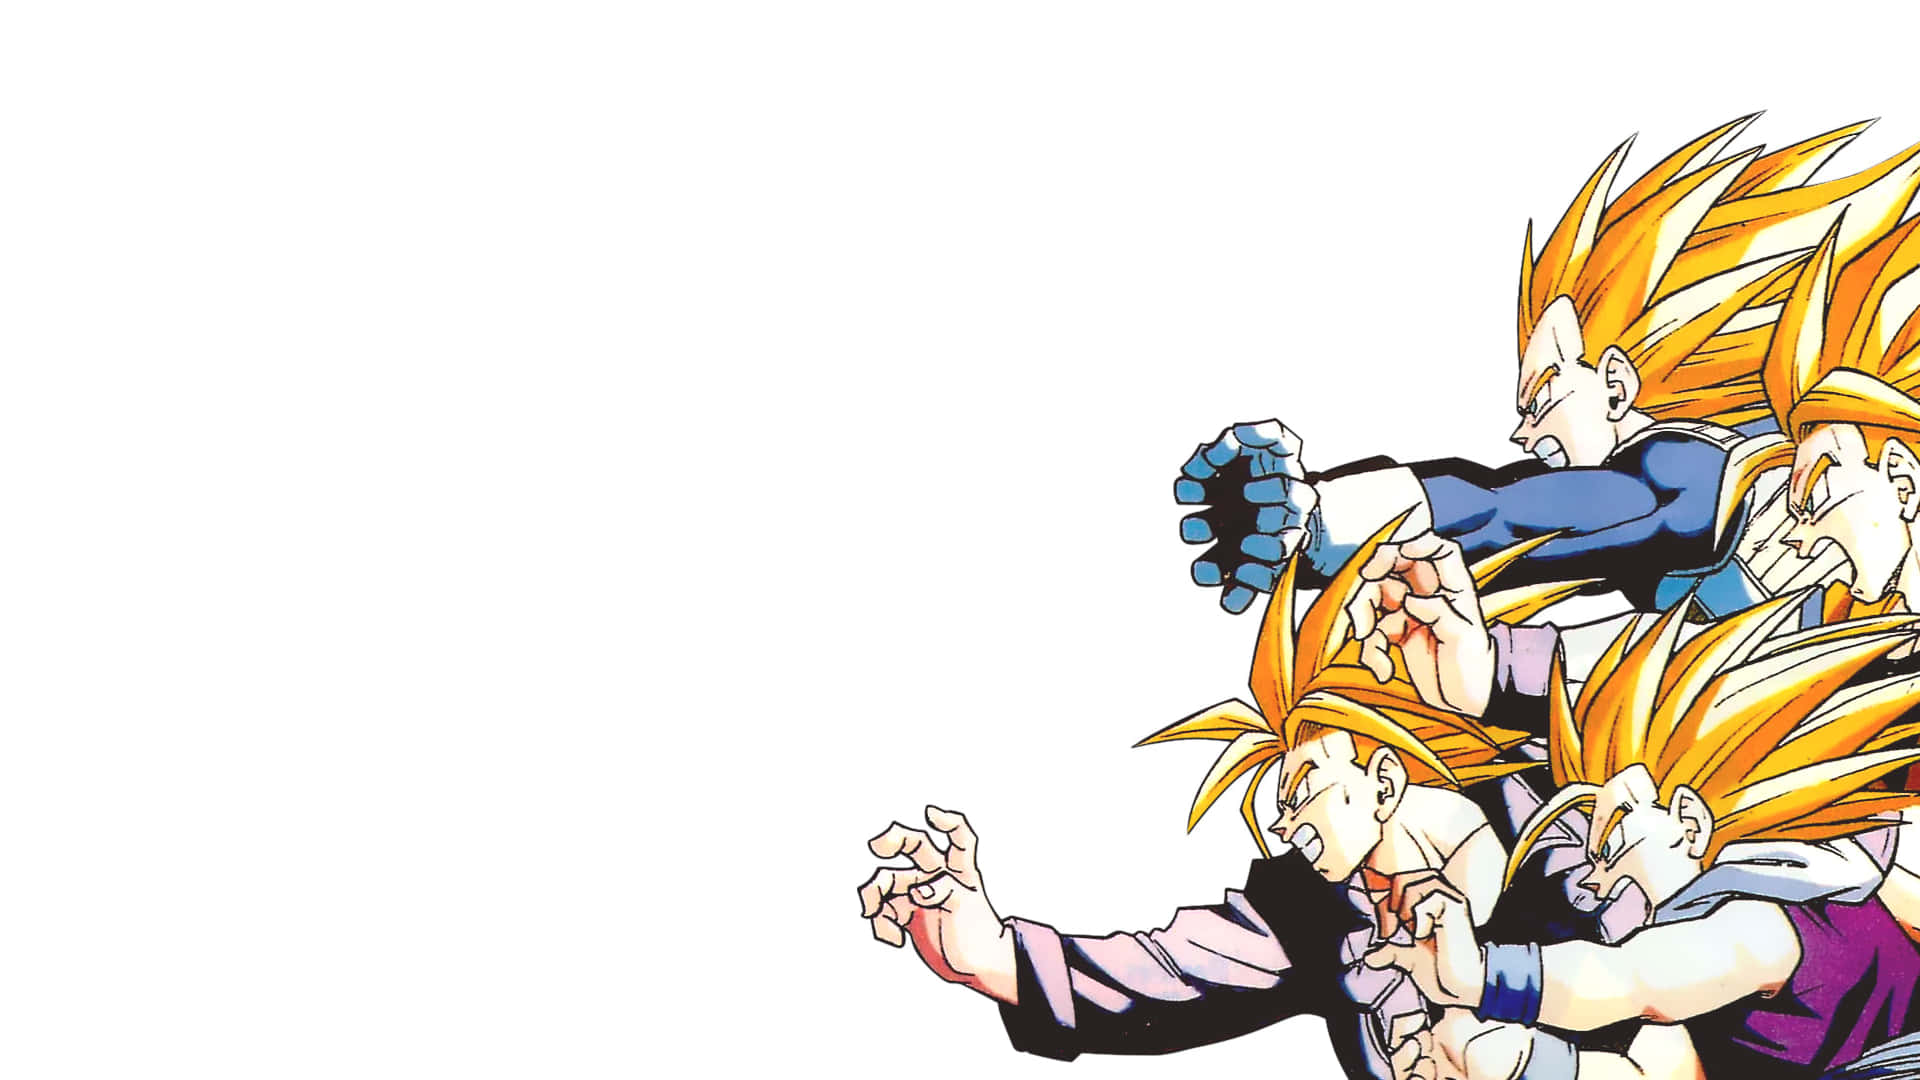 Trunks joins the fight in Dragon Ball Z Wallpaper